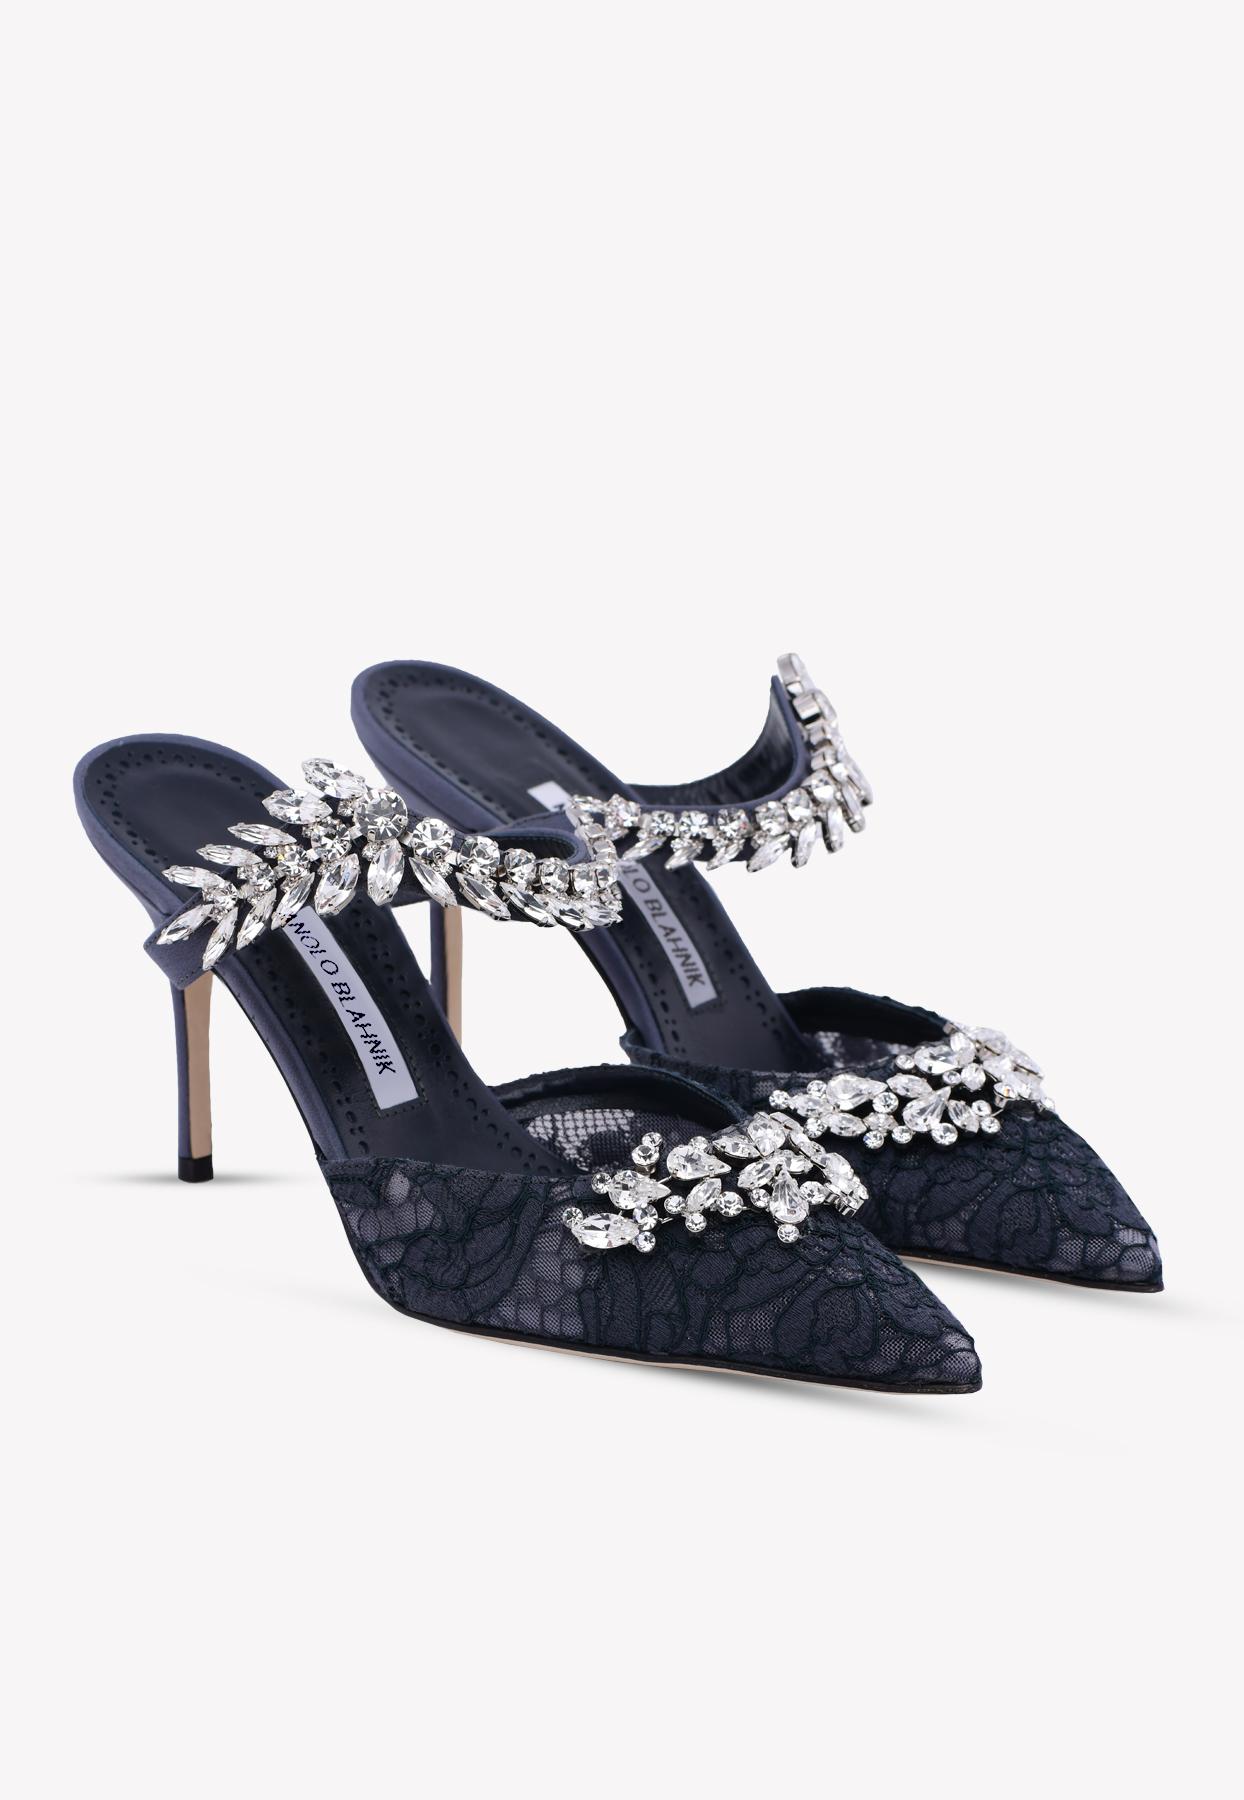 Manolo Blahnik Lurum Lace 90 Pumps With Crystal-embellished Detail in